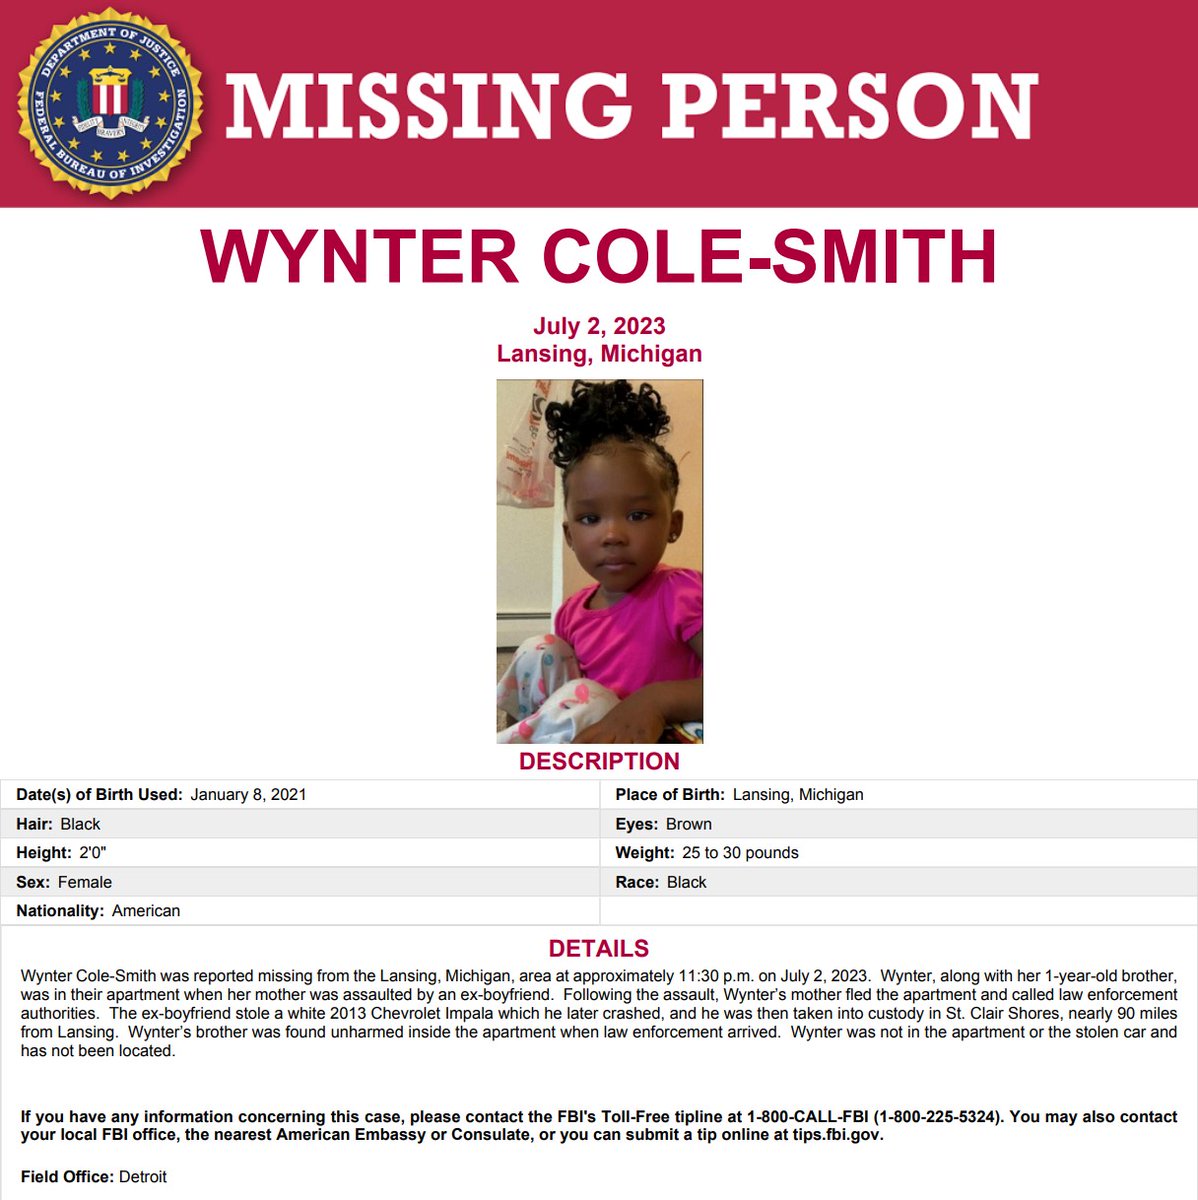 The #FBI is seeking the public's assistance in locating missing two-year-old Wynter Cole-Smith. If you have any information concerning this case, please contact the FBI's tipline at 1-800-CALL-FBI or submit tips at tips.fbi.gov. fbi.gov/wanted/kidnap/…